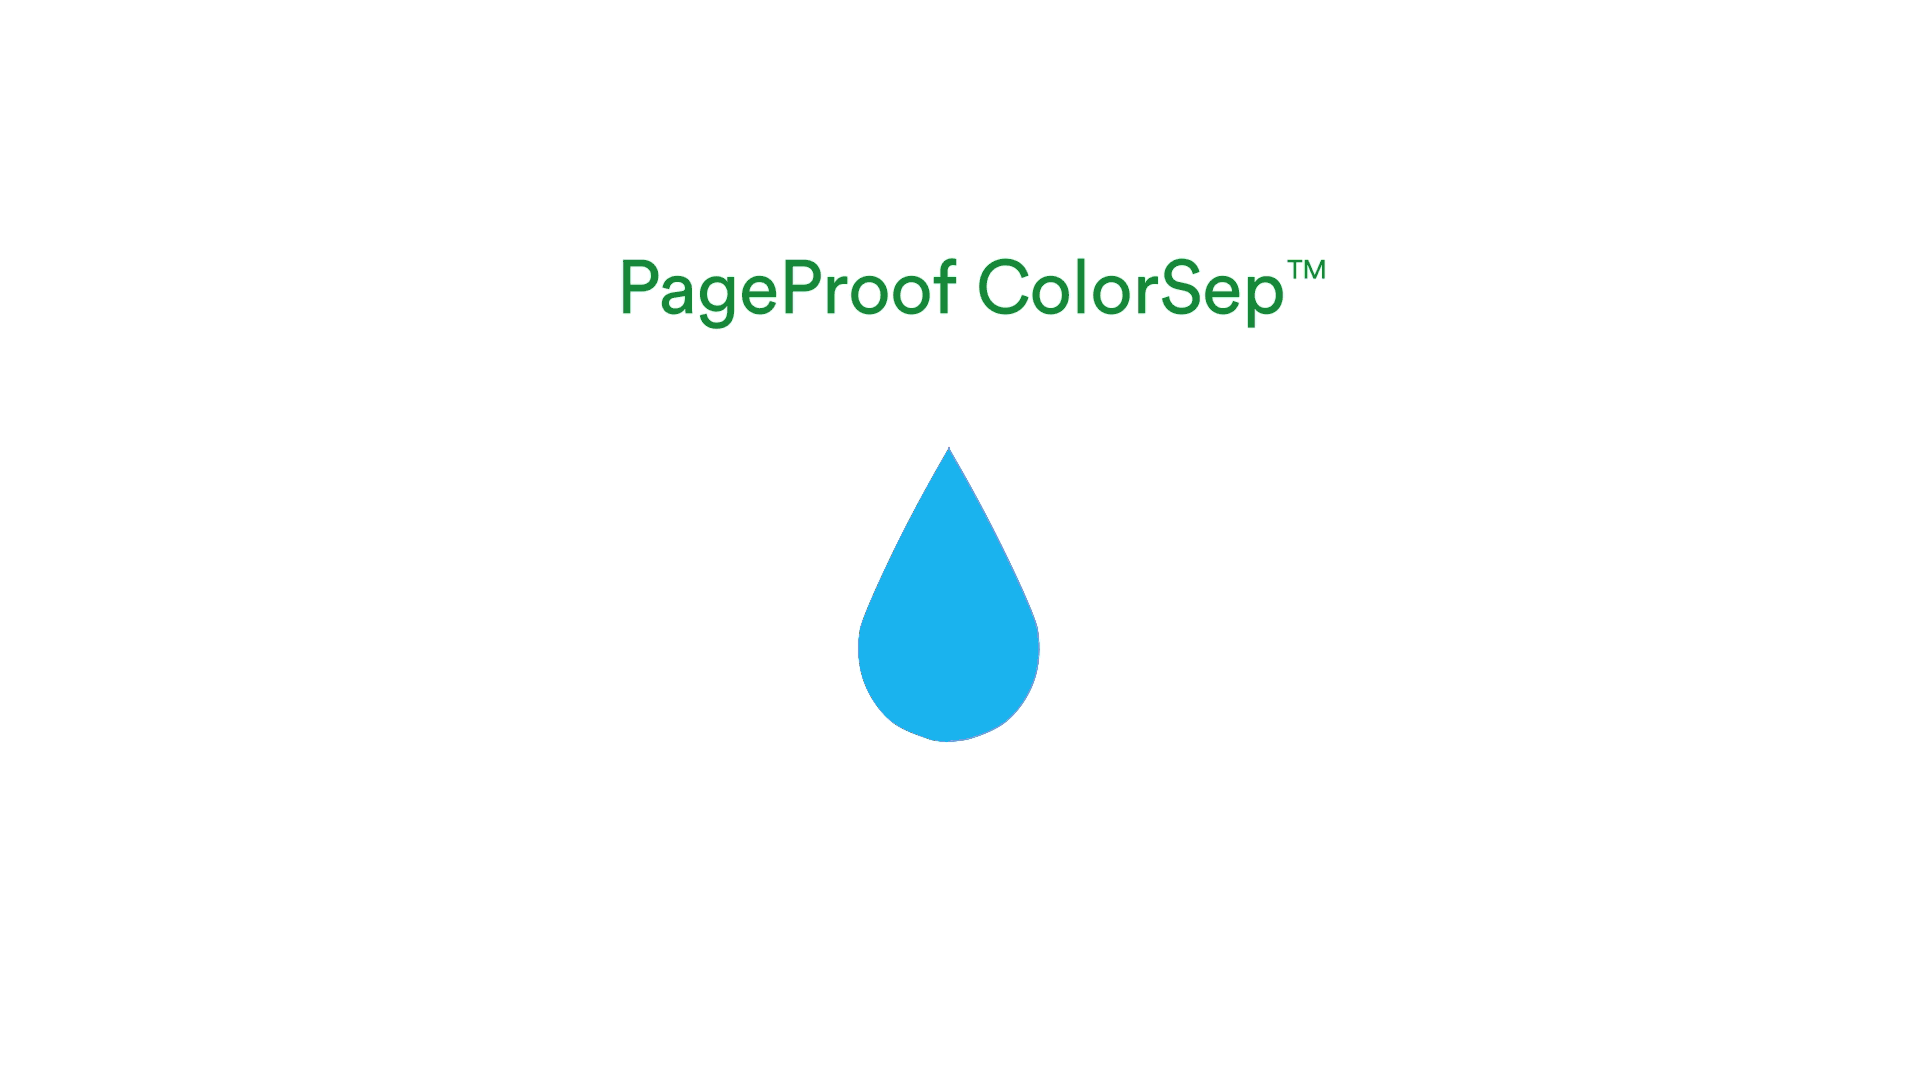 PageProof ColorSep™ is a color separation mode for easy proofing of CMYK color plates previews. 